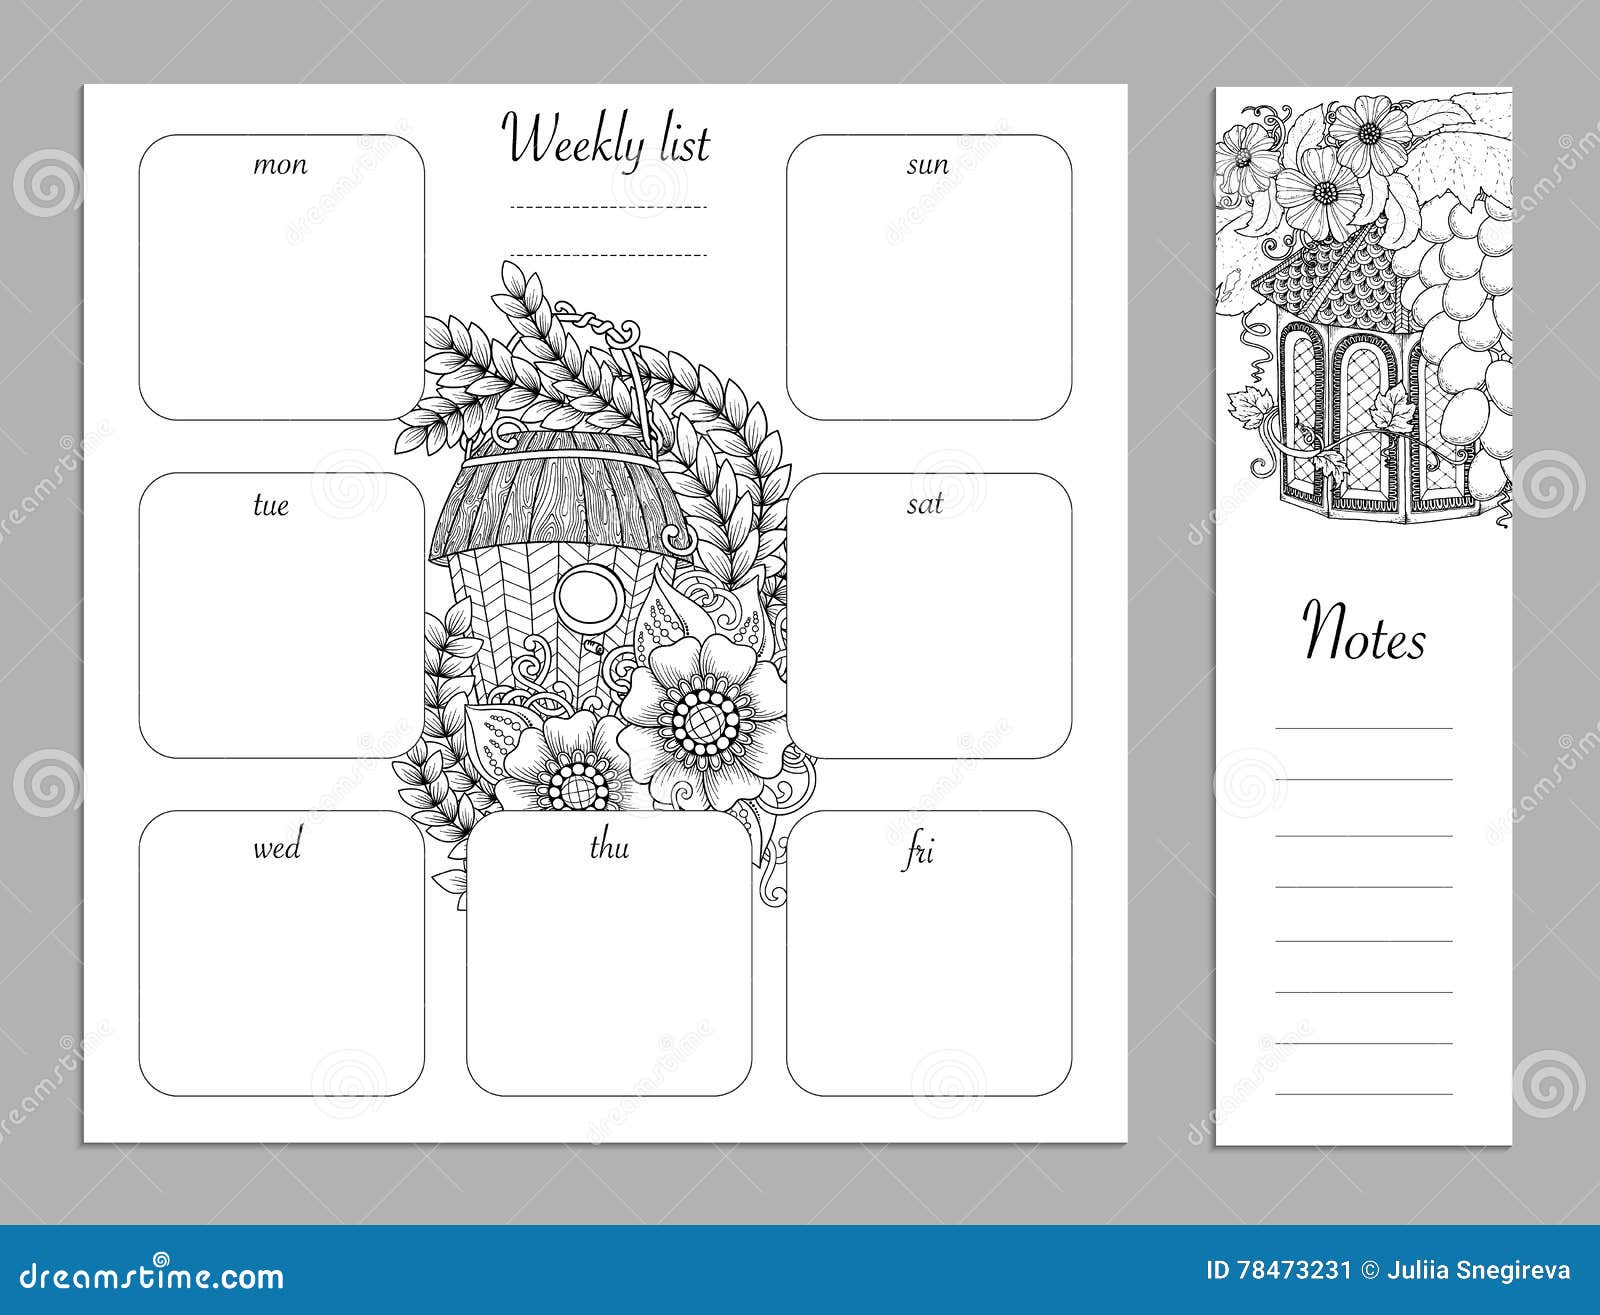 Weekly planner coloring page Stock Vector